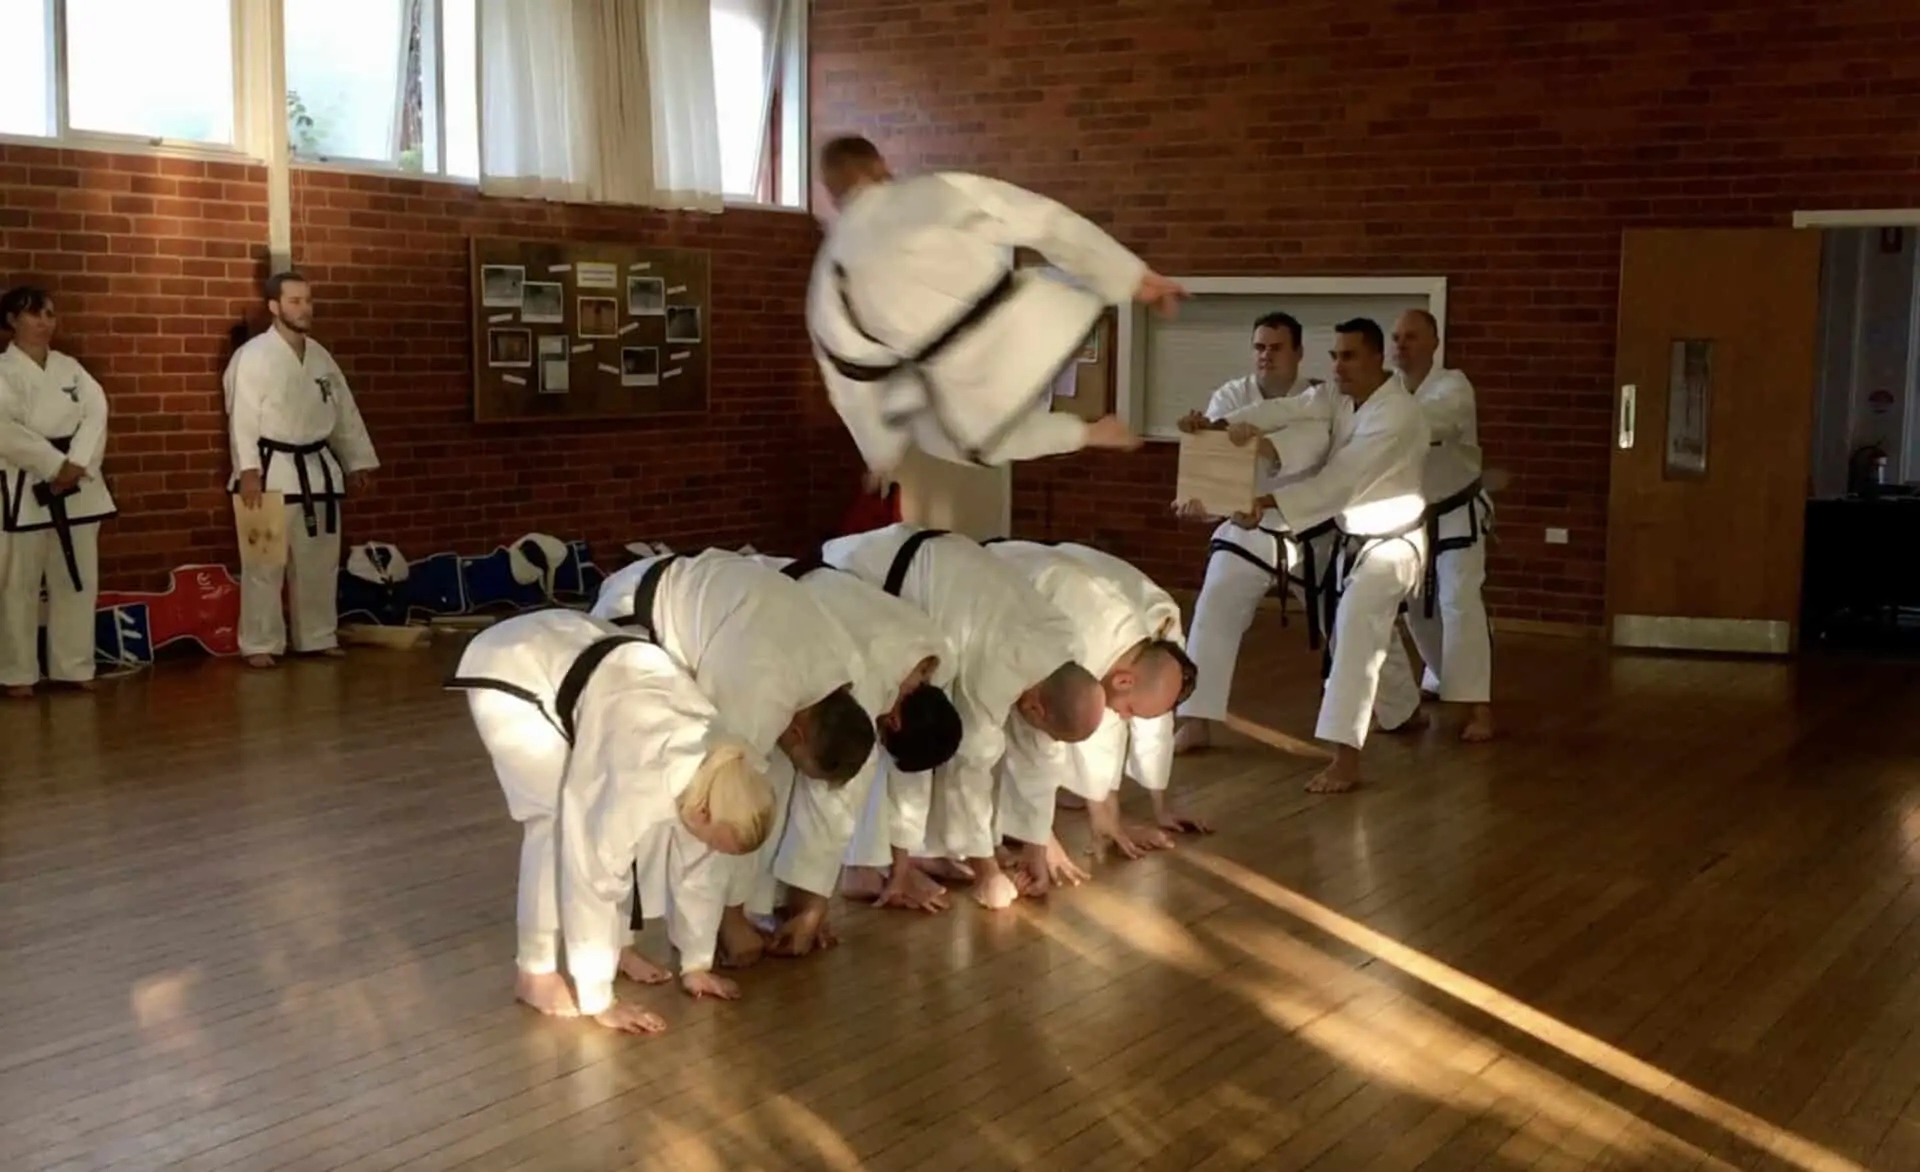 Chief Instructor Alex flying over 5 black belts while performing a flying side kick.